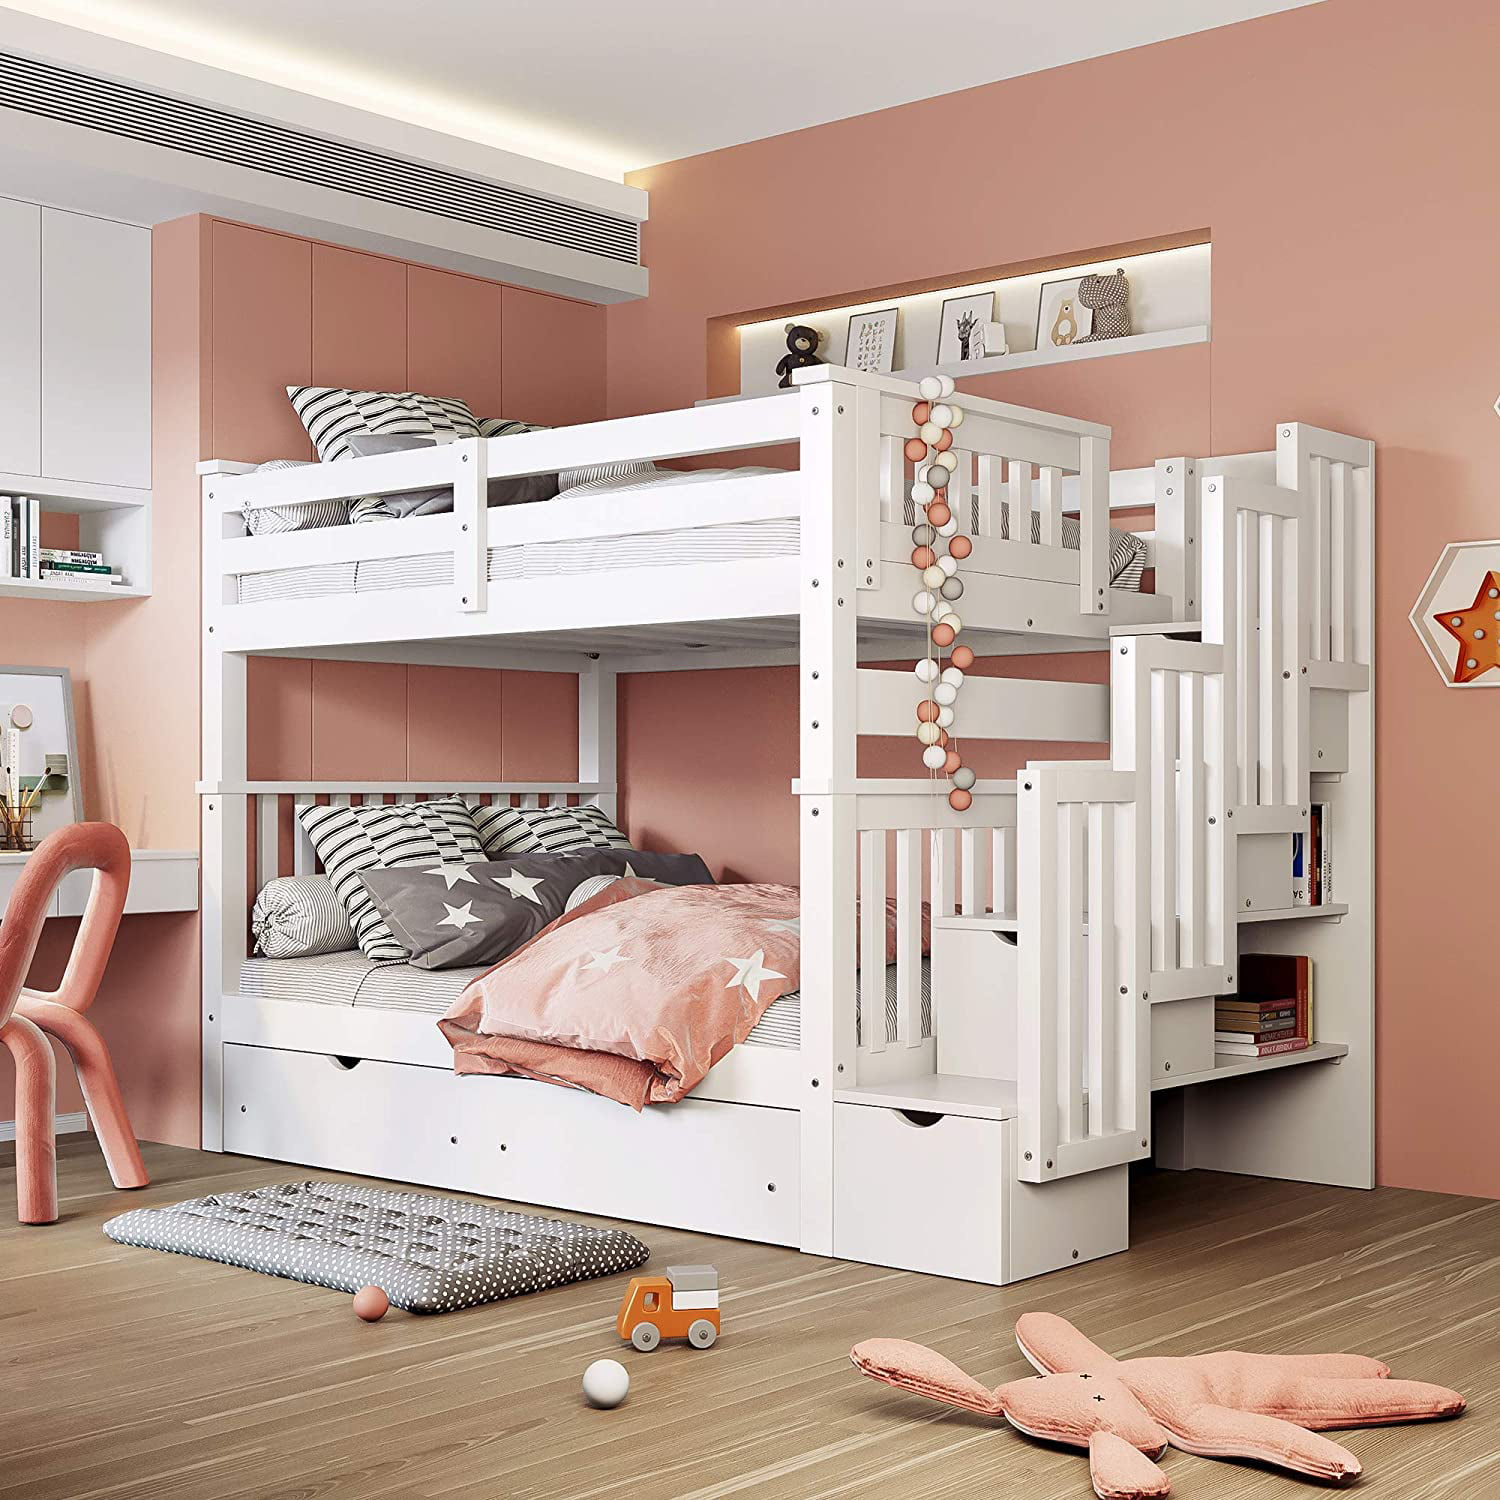 Full Stairway Bunk Bed, Full Bunk Beds With Storage